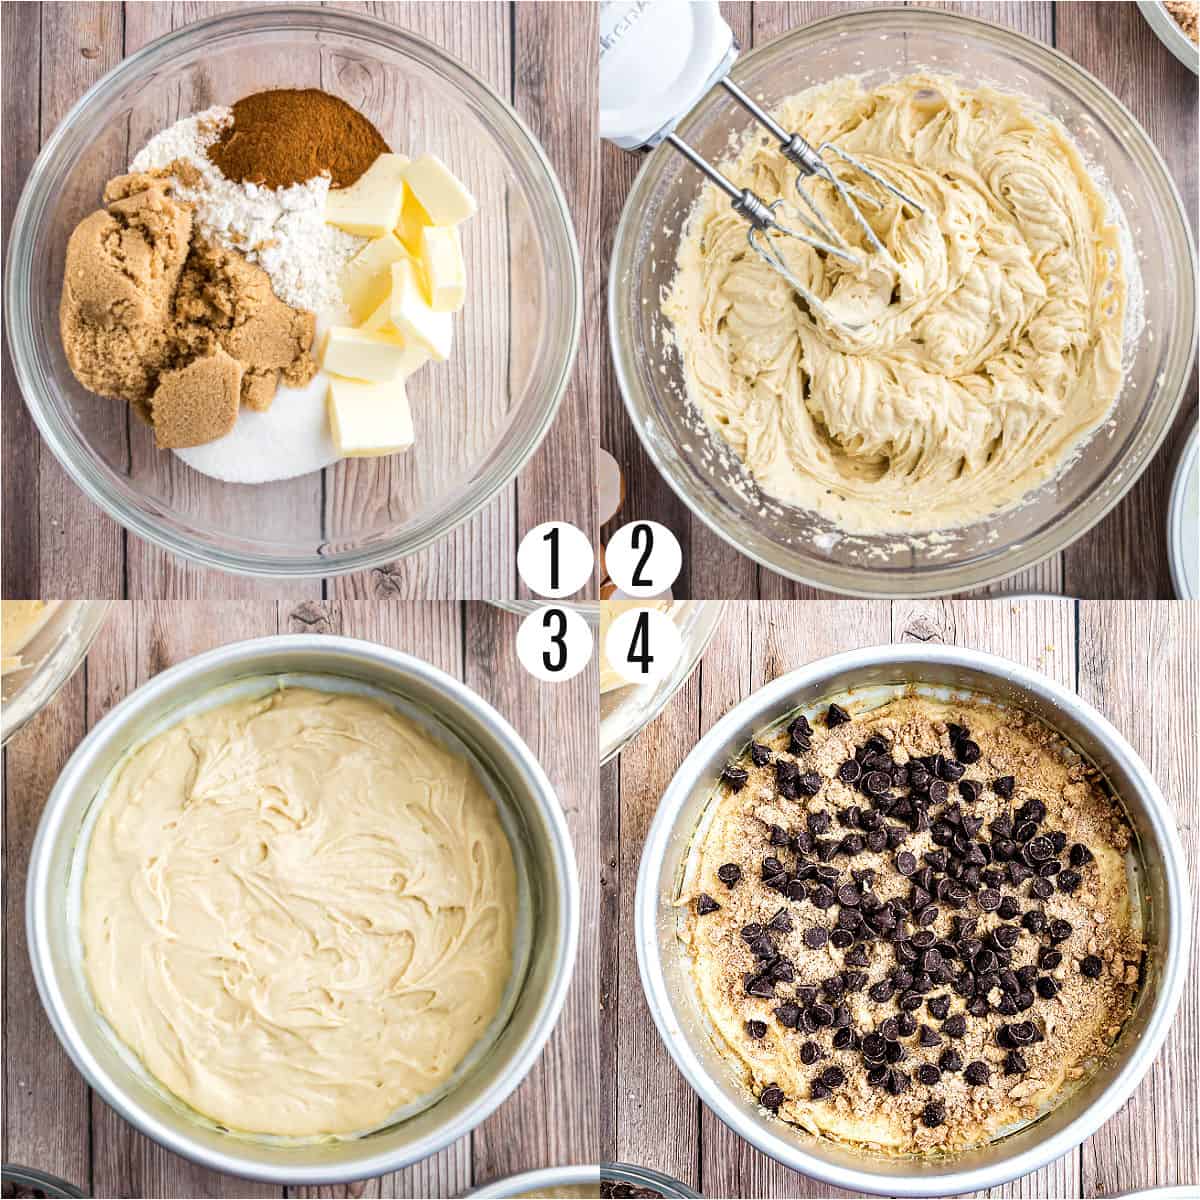 Step by step photos showing how to make chocolate chip coffee cake.